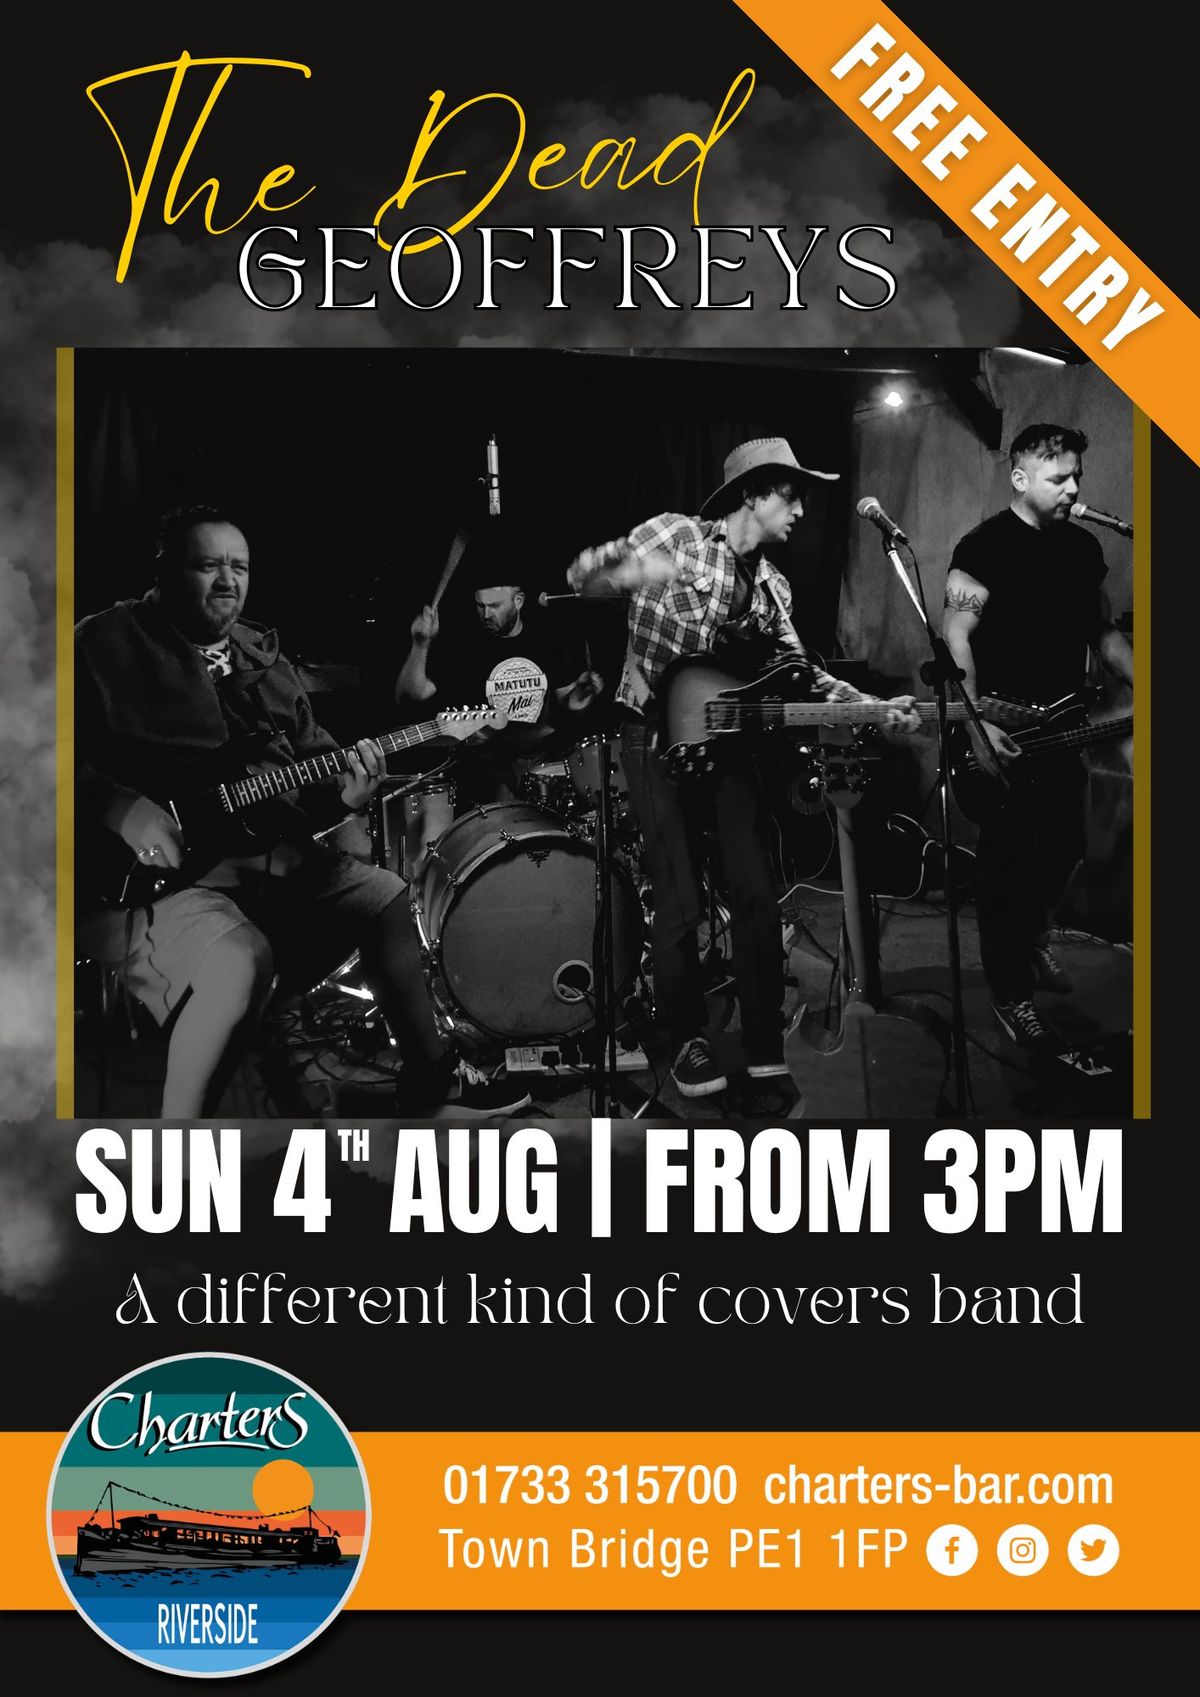 Charters Summer Sunday:  The Dead Geoffreys